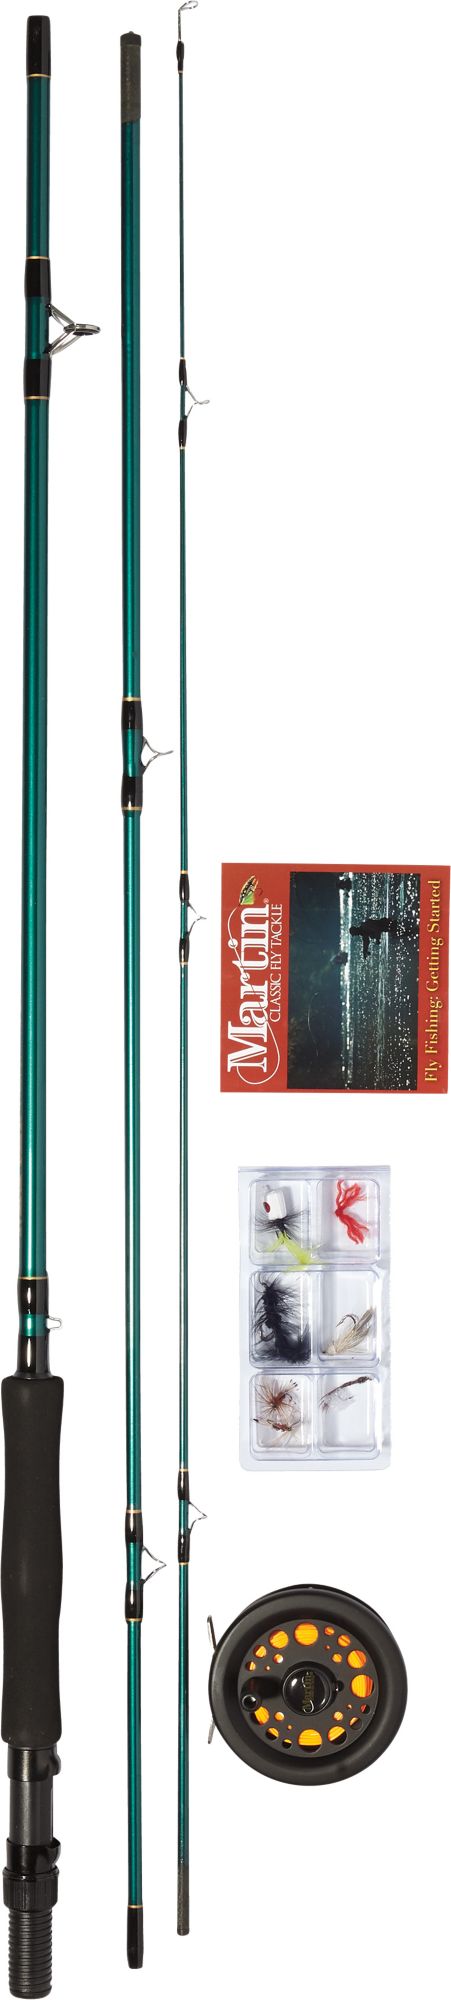 martin fly fishing rod reviews for Sale OFF 68%